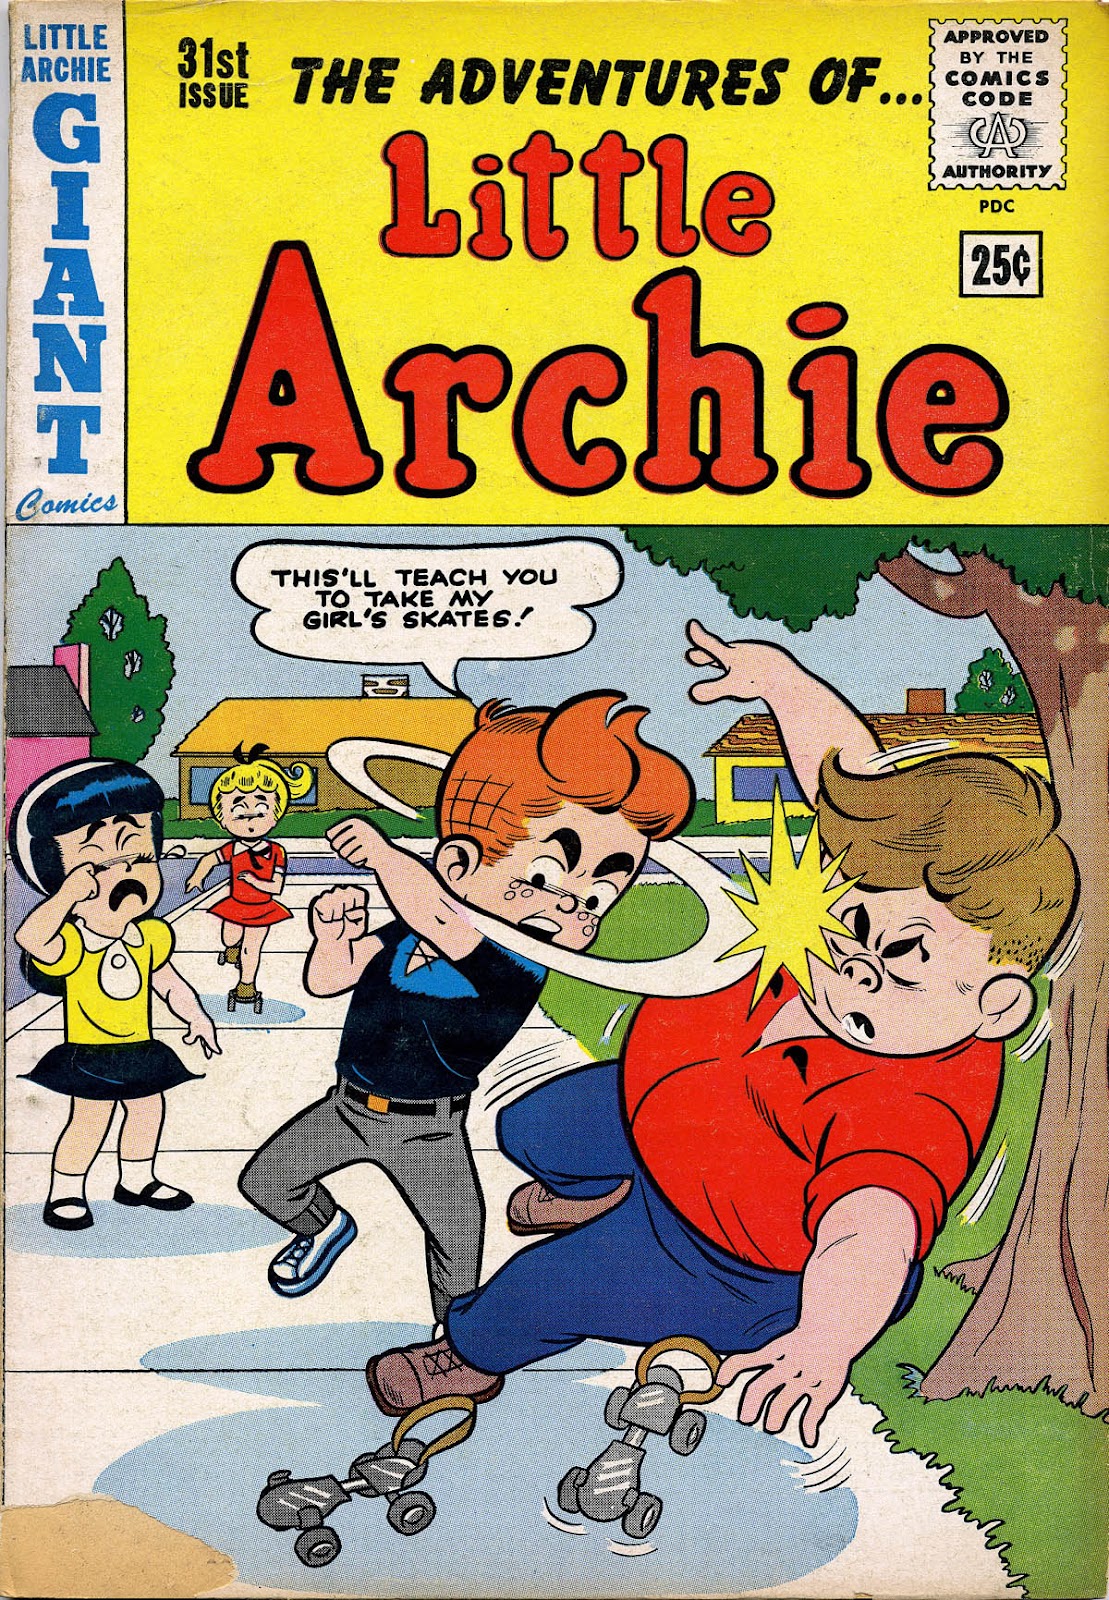 The Adventures of Little Archie issue 31 - Page 1